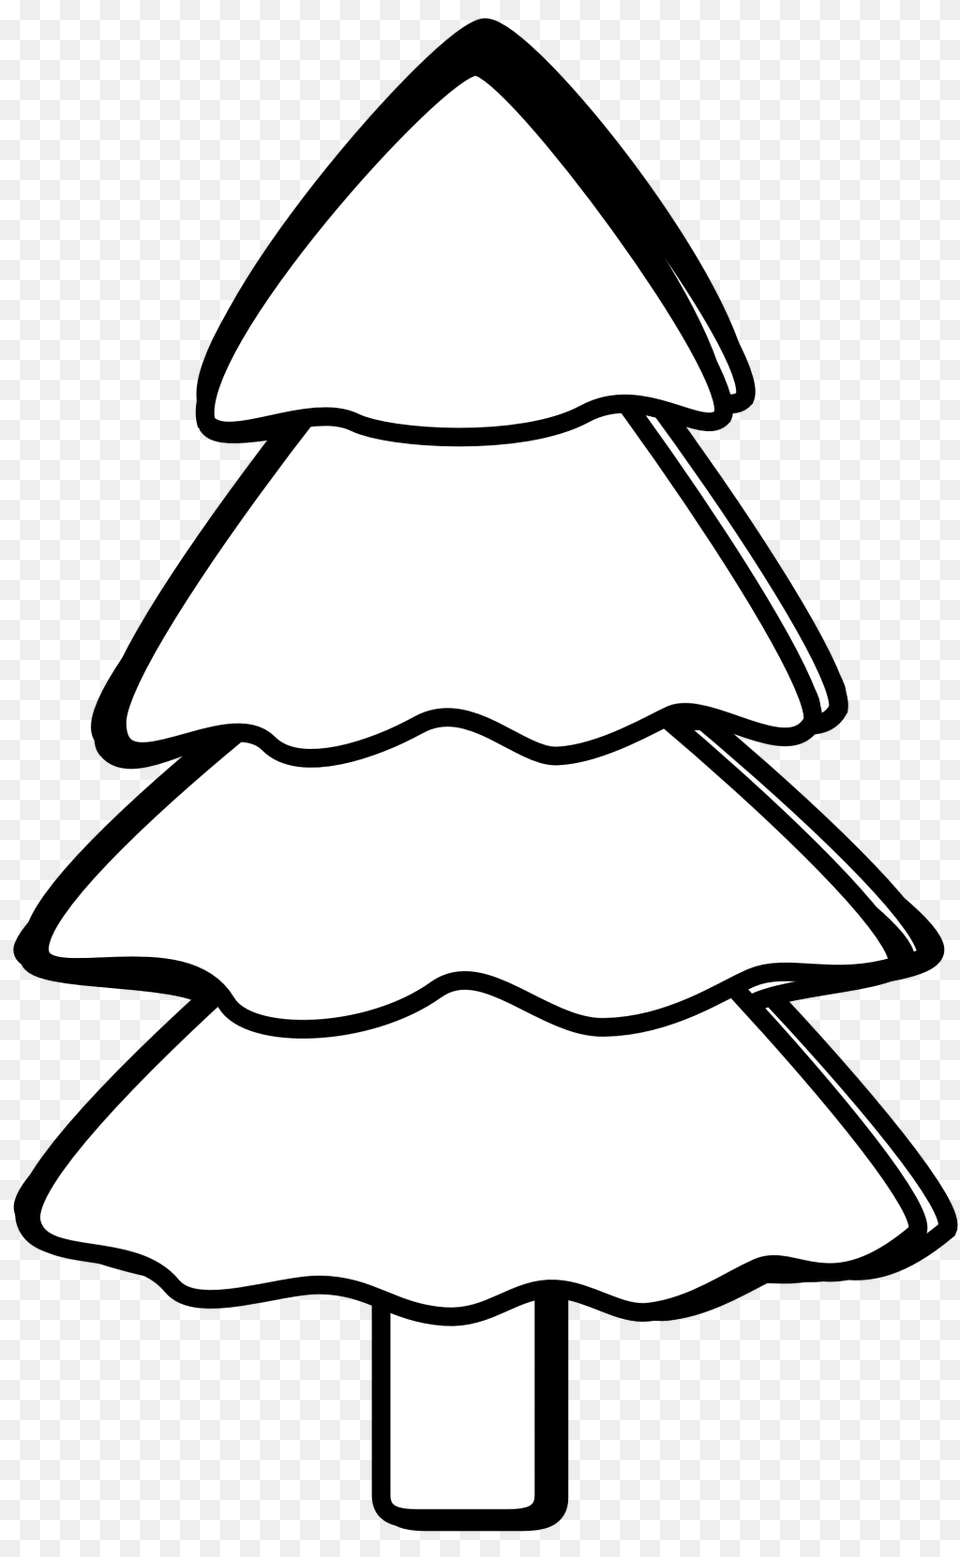 Baby Nursery Exquisite Clip Art Black And White Xmas Trees, Animal, Fish, Sea Life, Shark Free Transparent Png